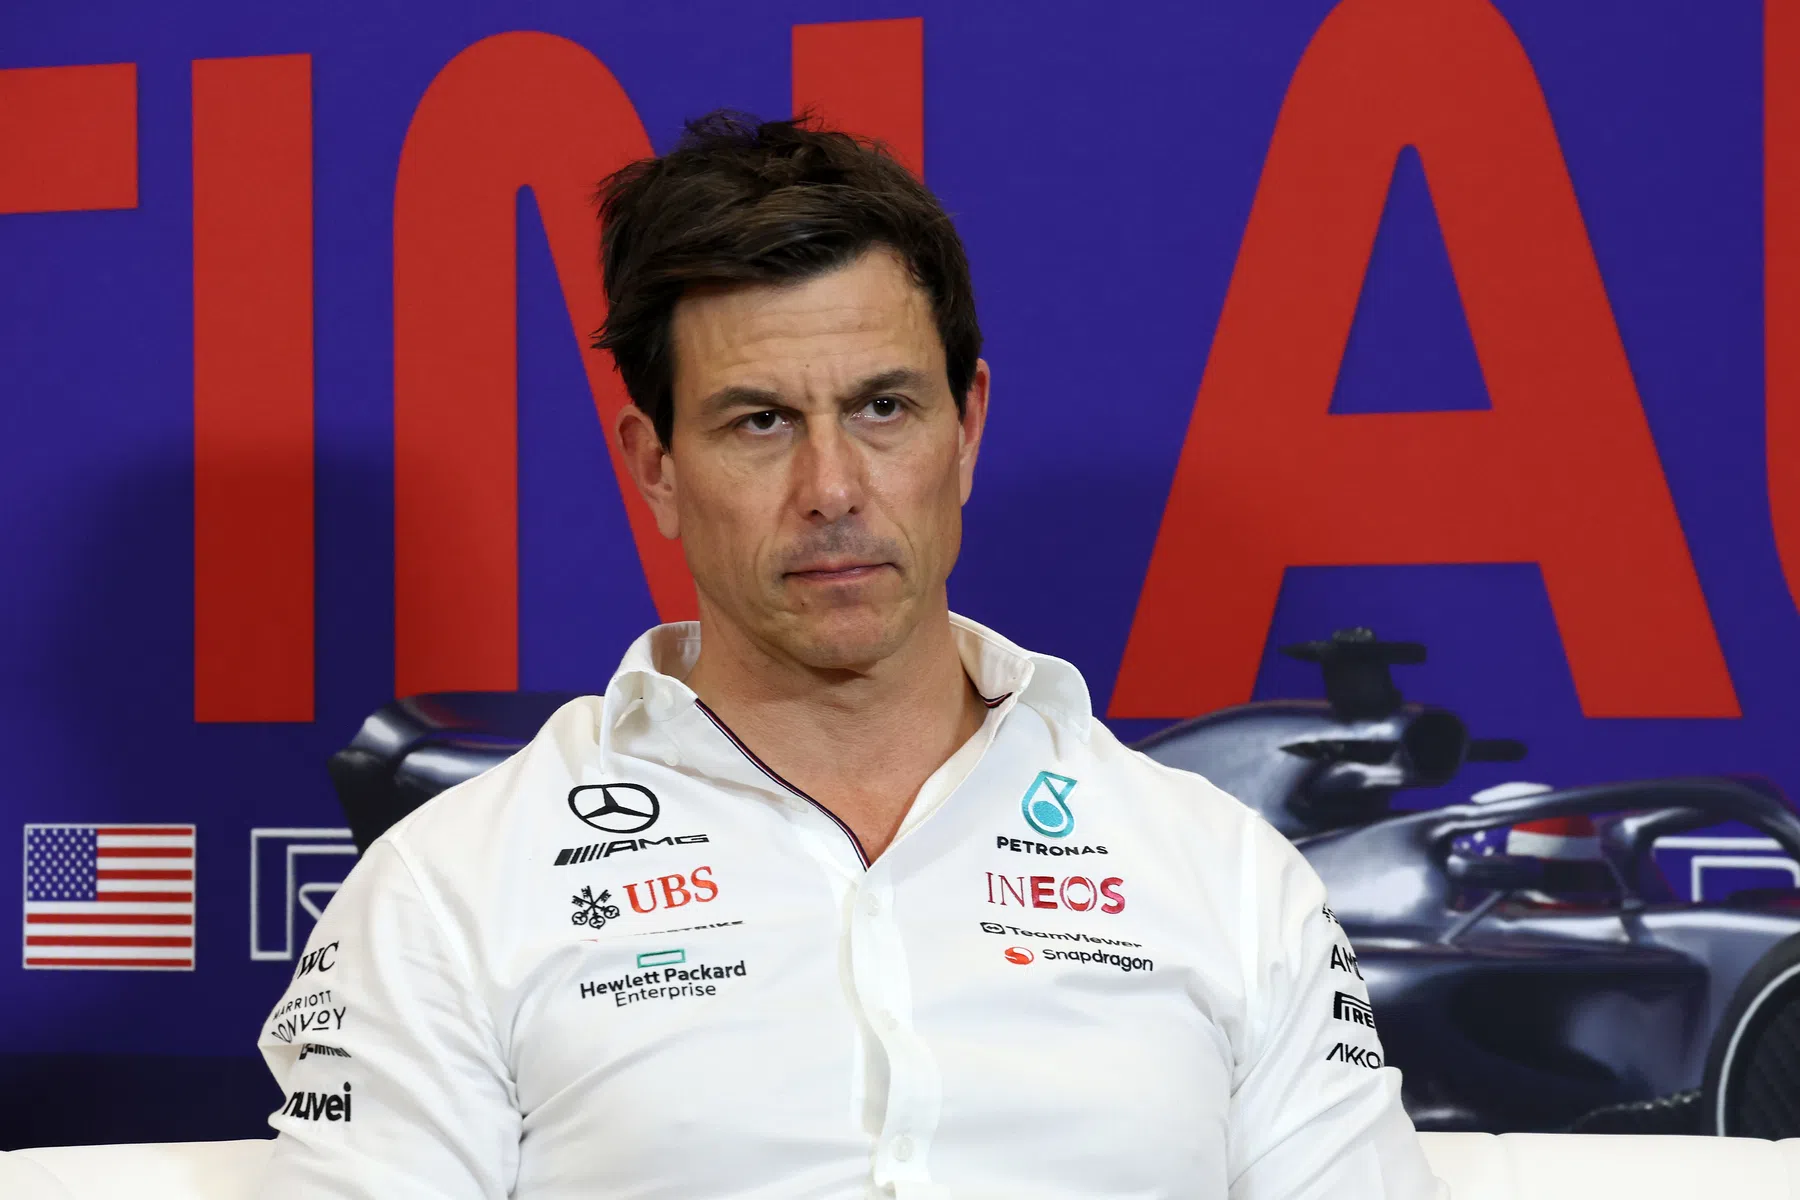 Who will replace Hamilton at Mercedes? This is what Toto Wolff says